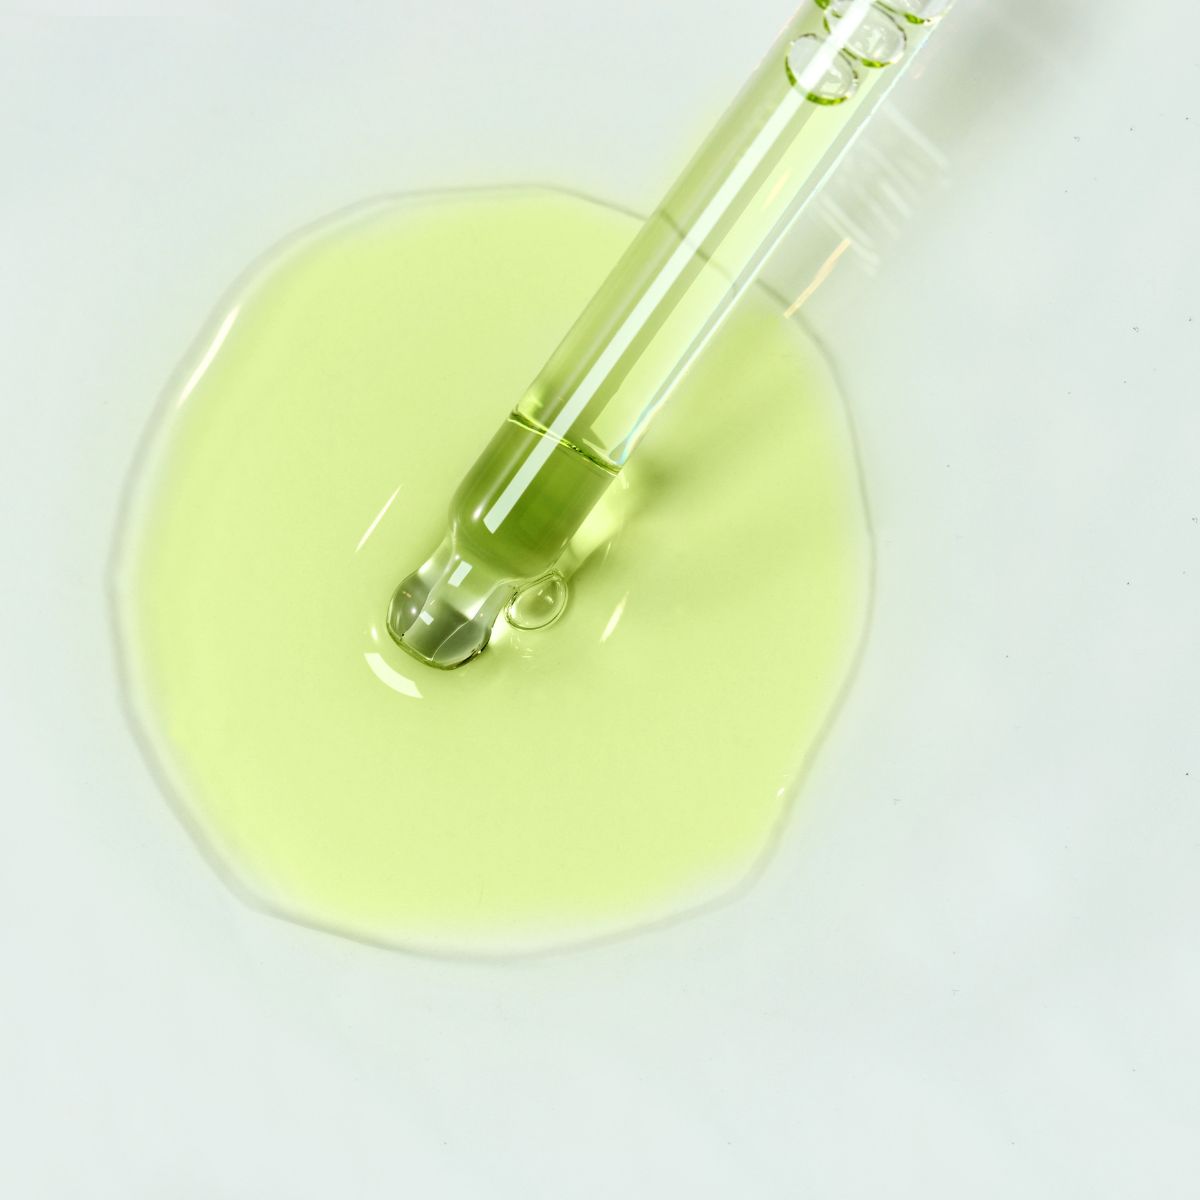 GREEN VITAMIN C TONING AMPOULE